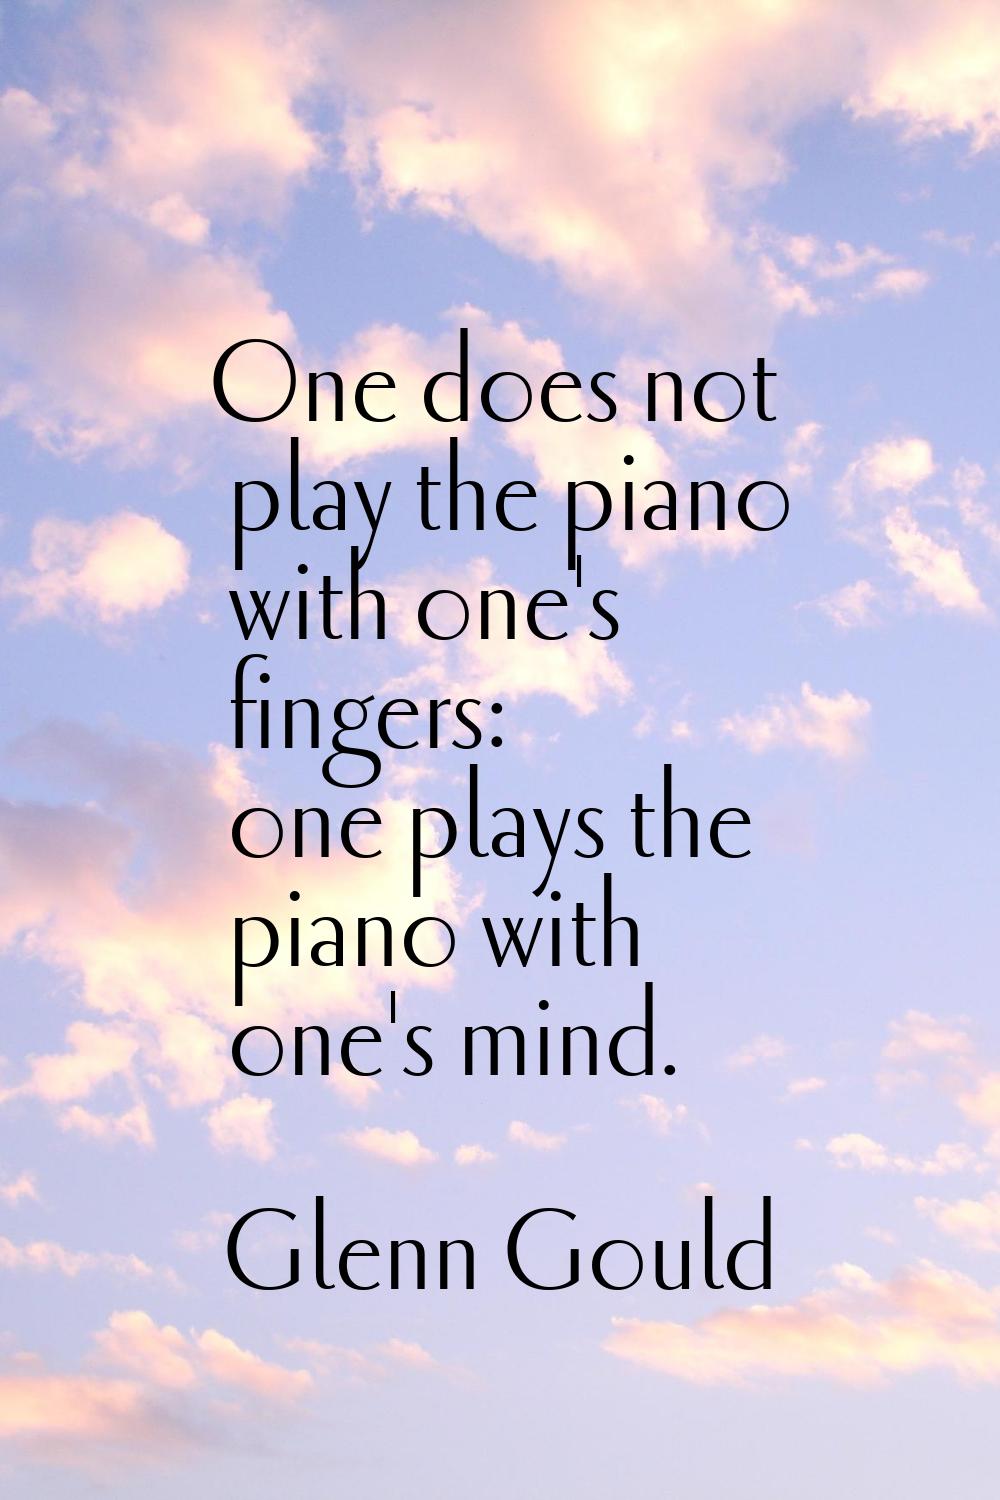 One does not play the piano with one's fingers: one plays the piano with one's mind.